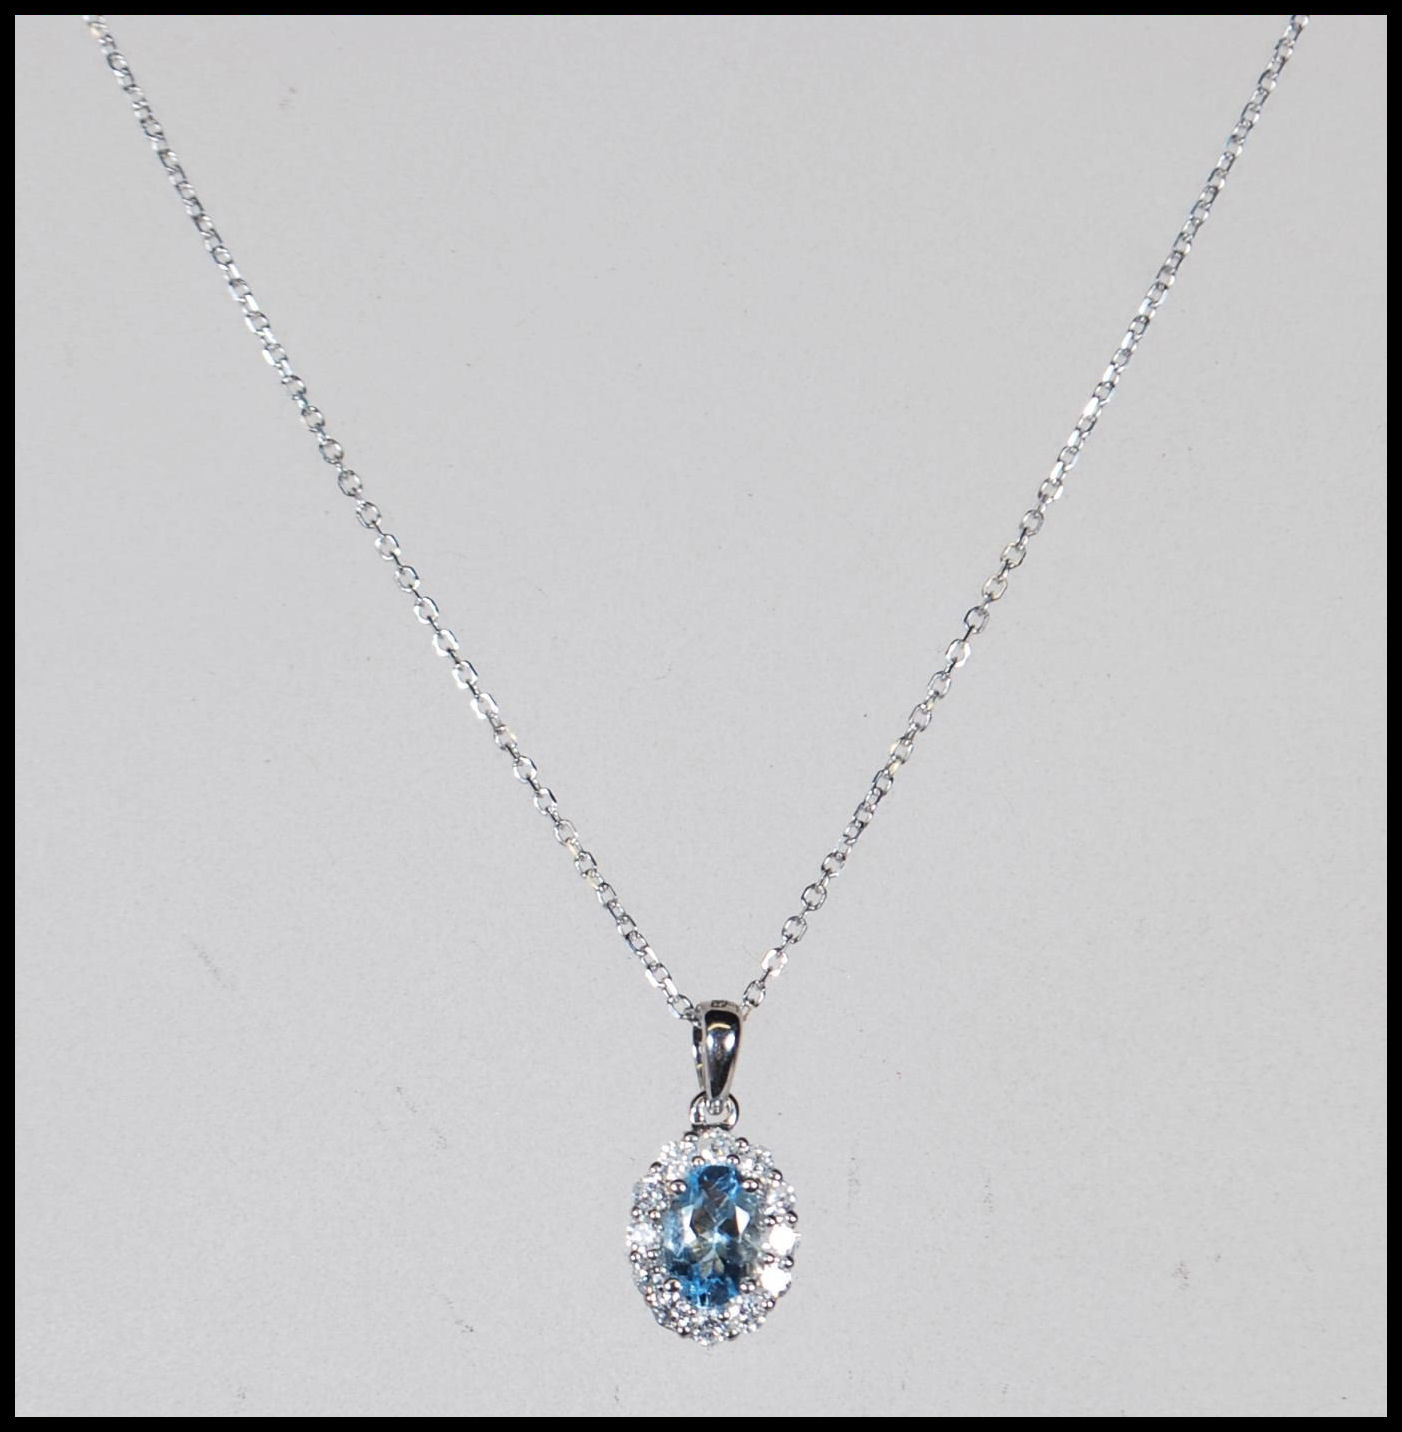 An 18ct white gold, aquamarine and diamond set necklace pendant set to a gold back chai. The central